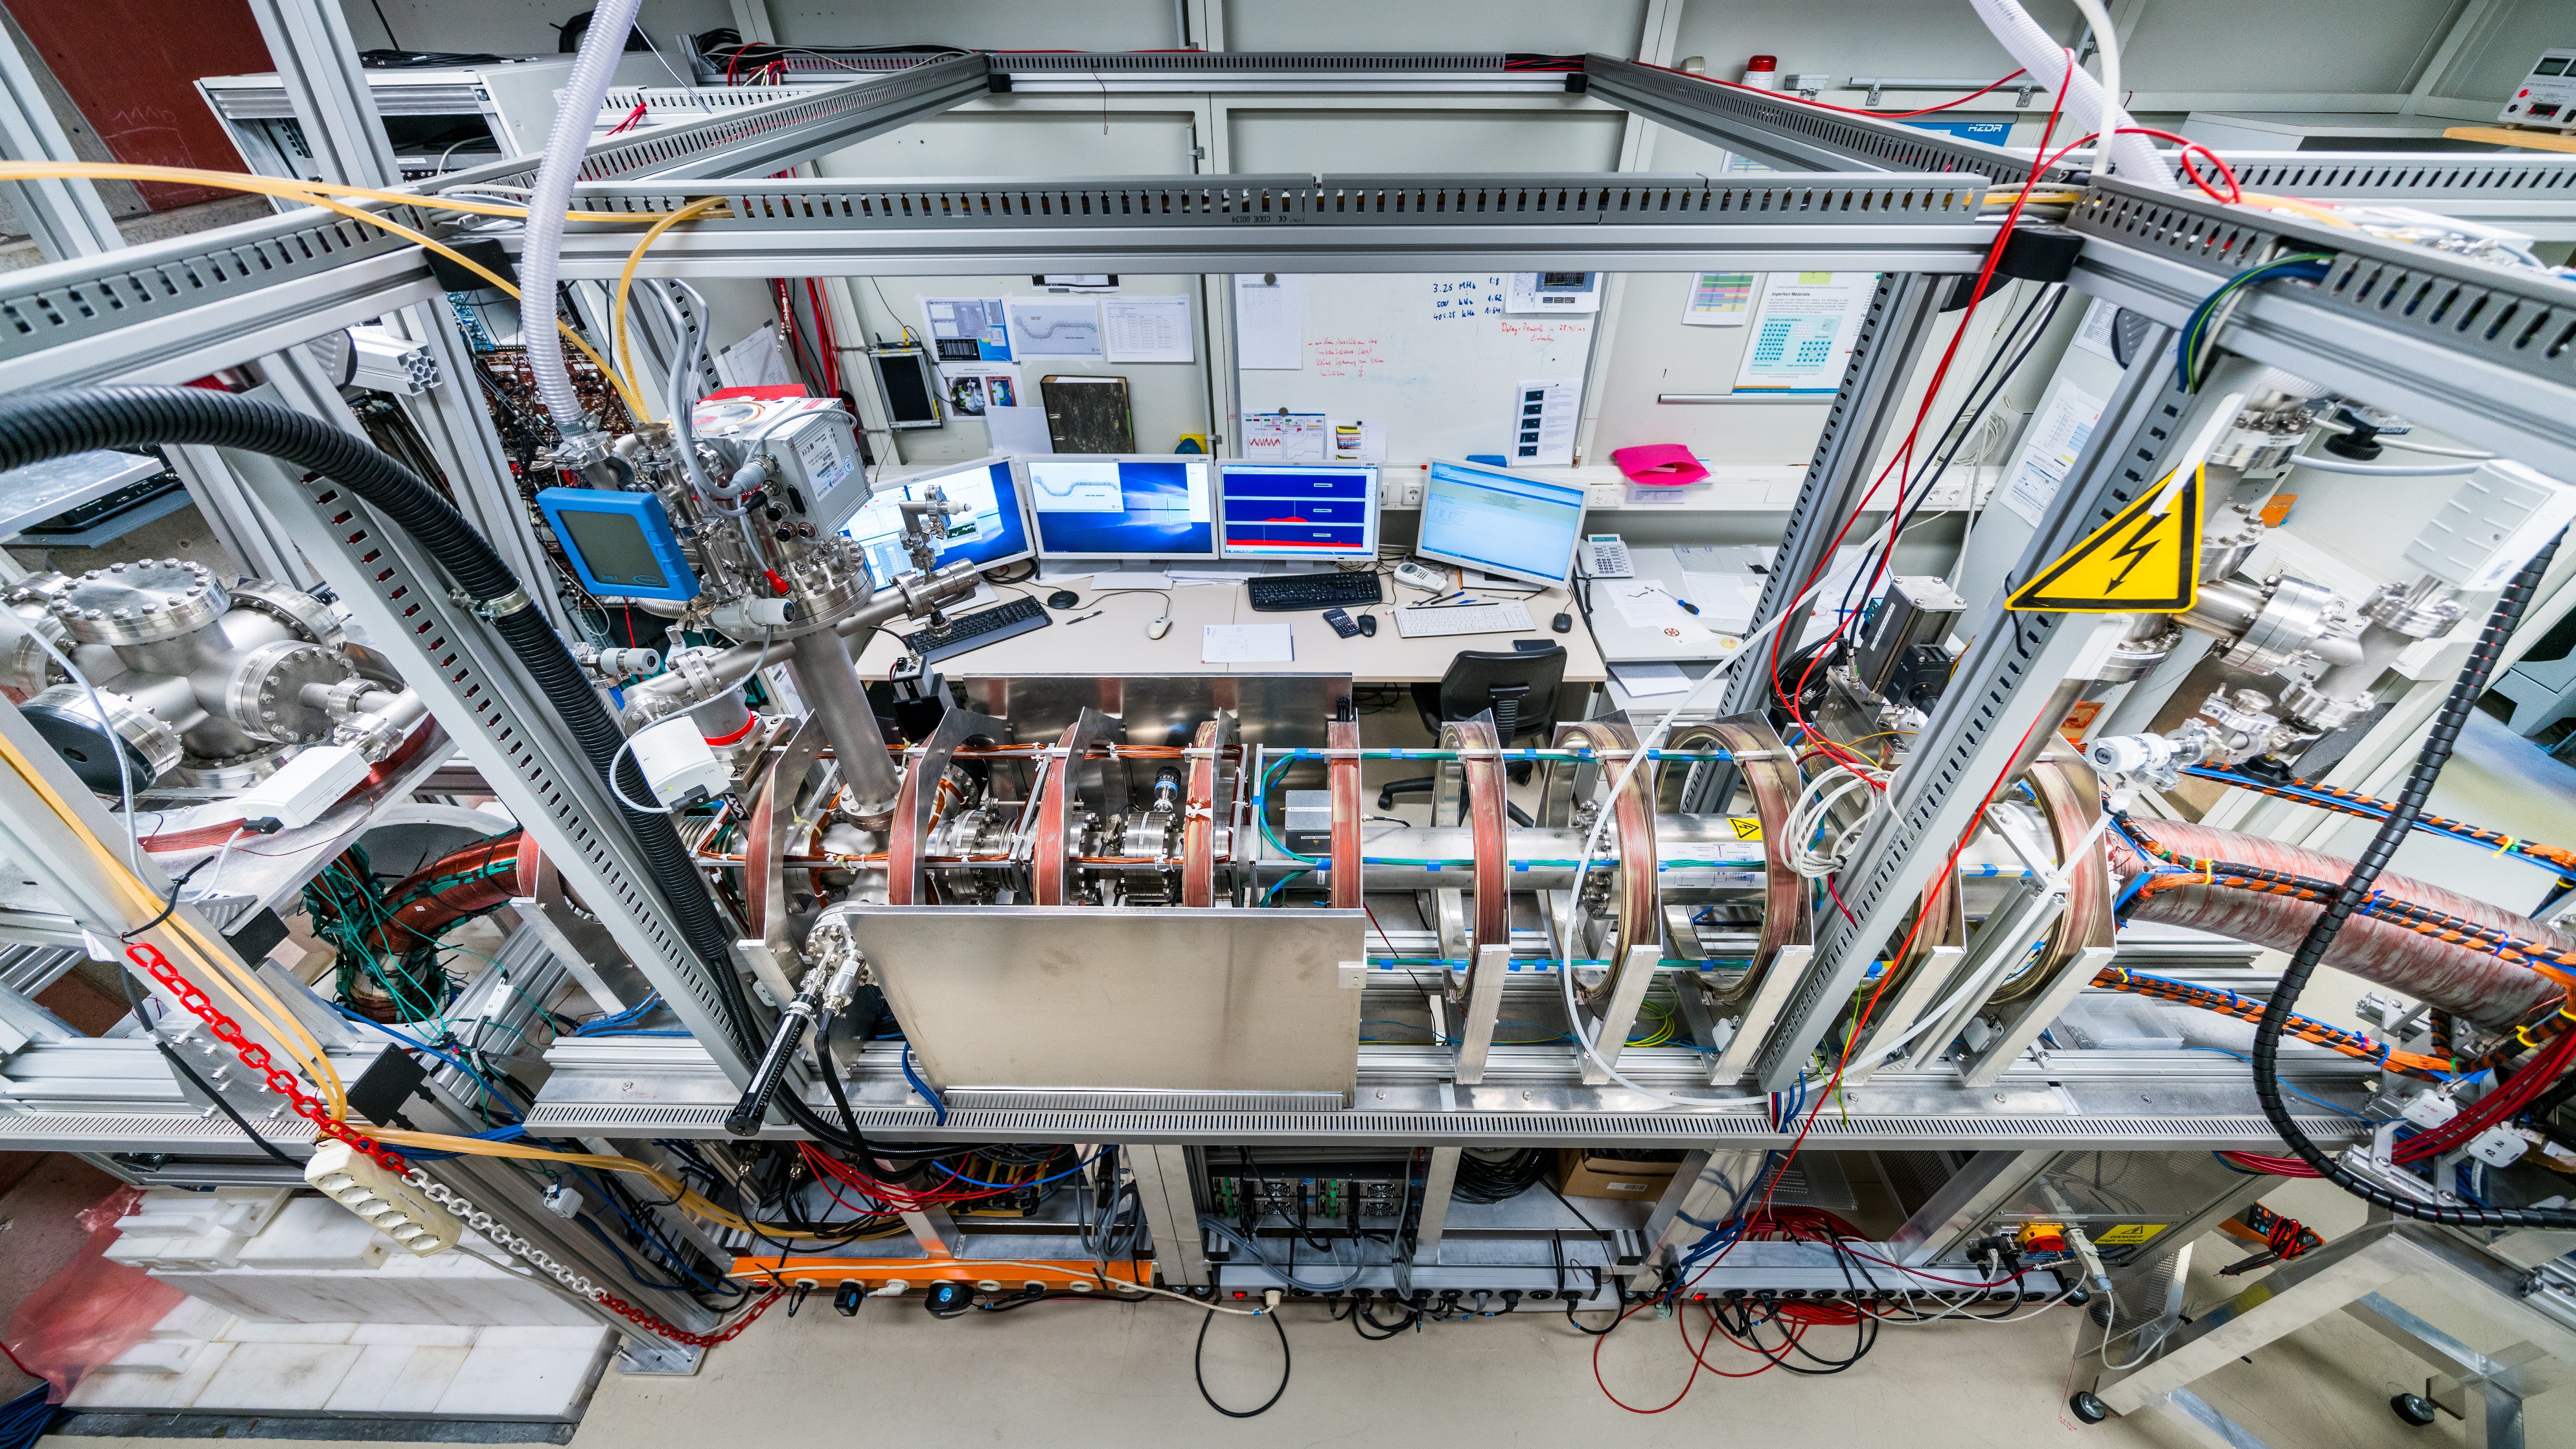 Experimental setup of the positron system at Helmholtz-Zentrum Dresden-Rossendorf in Germany (photo credit: HZDR/A. Wirsig).